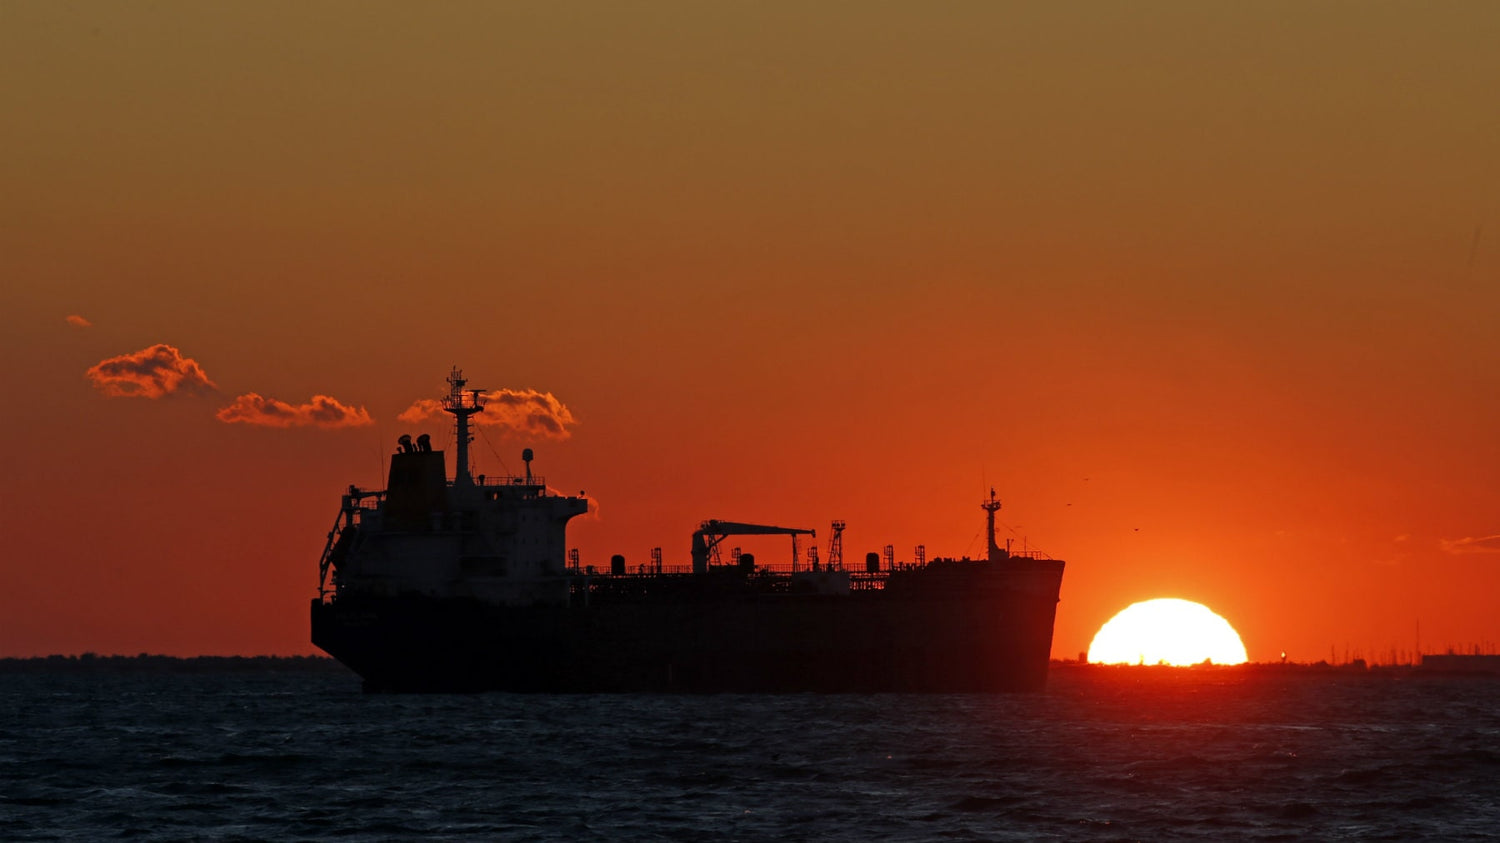 A vessel ship in the dark ocean besides a red setting sun and some clouds